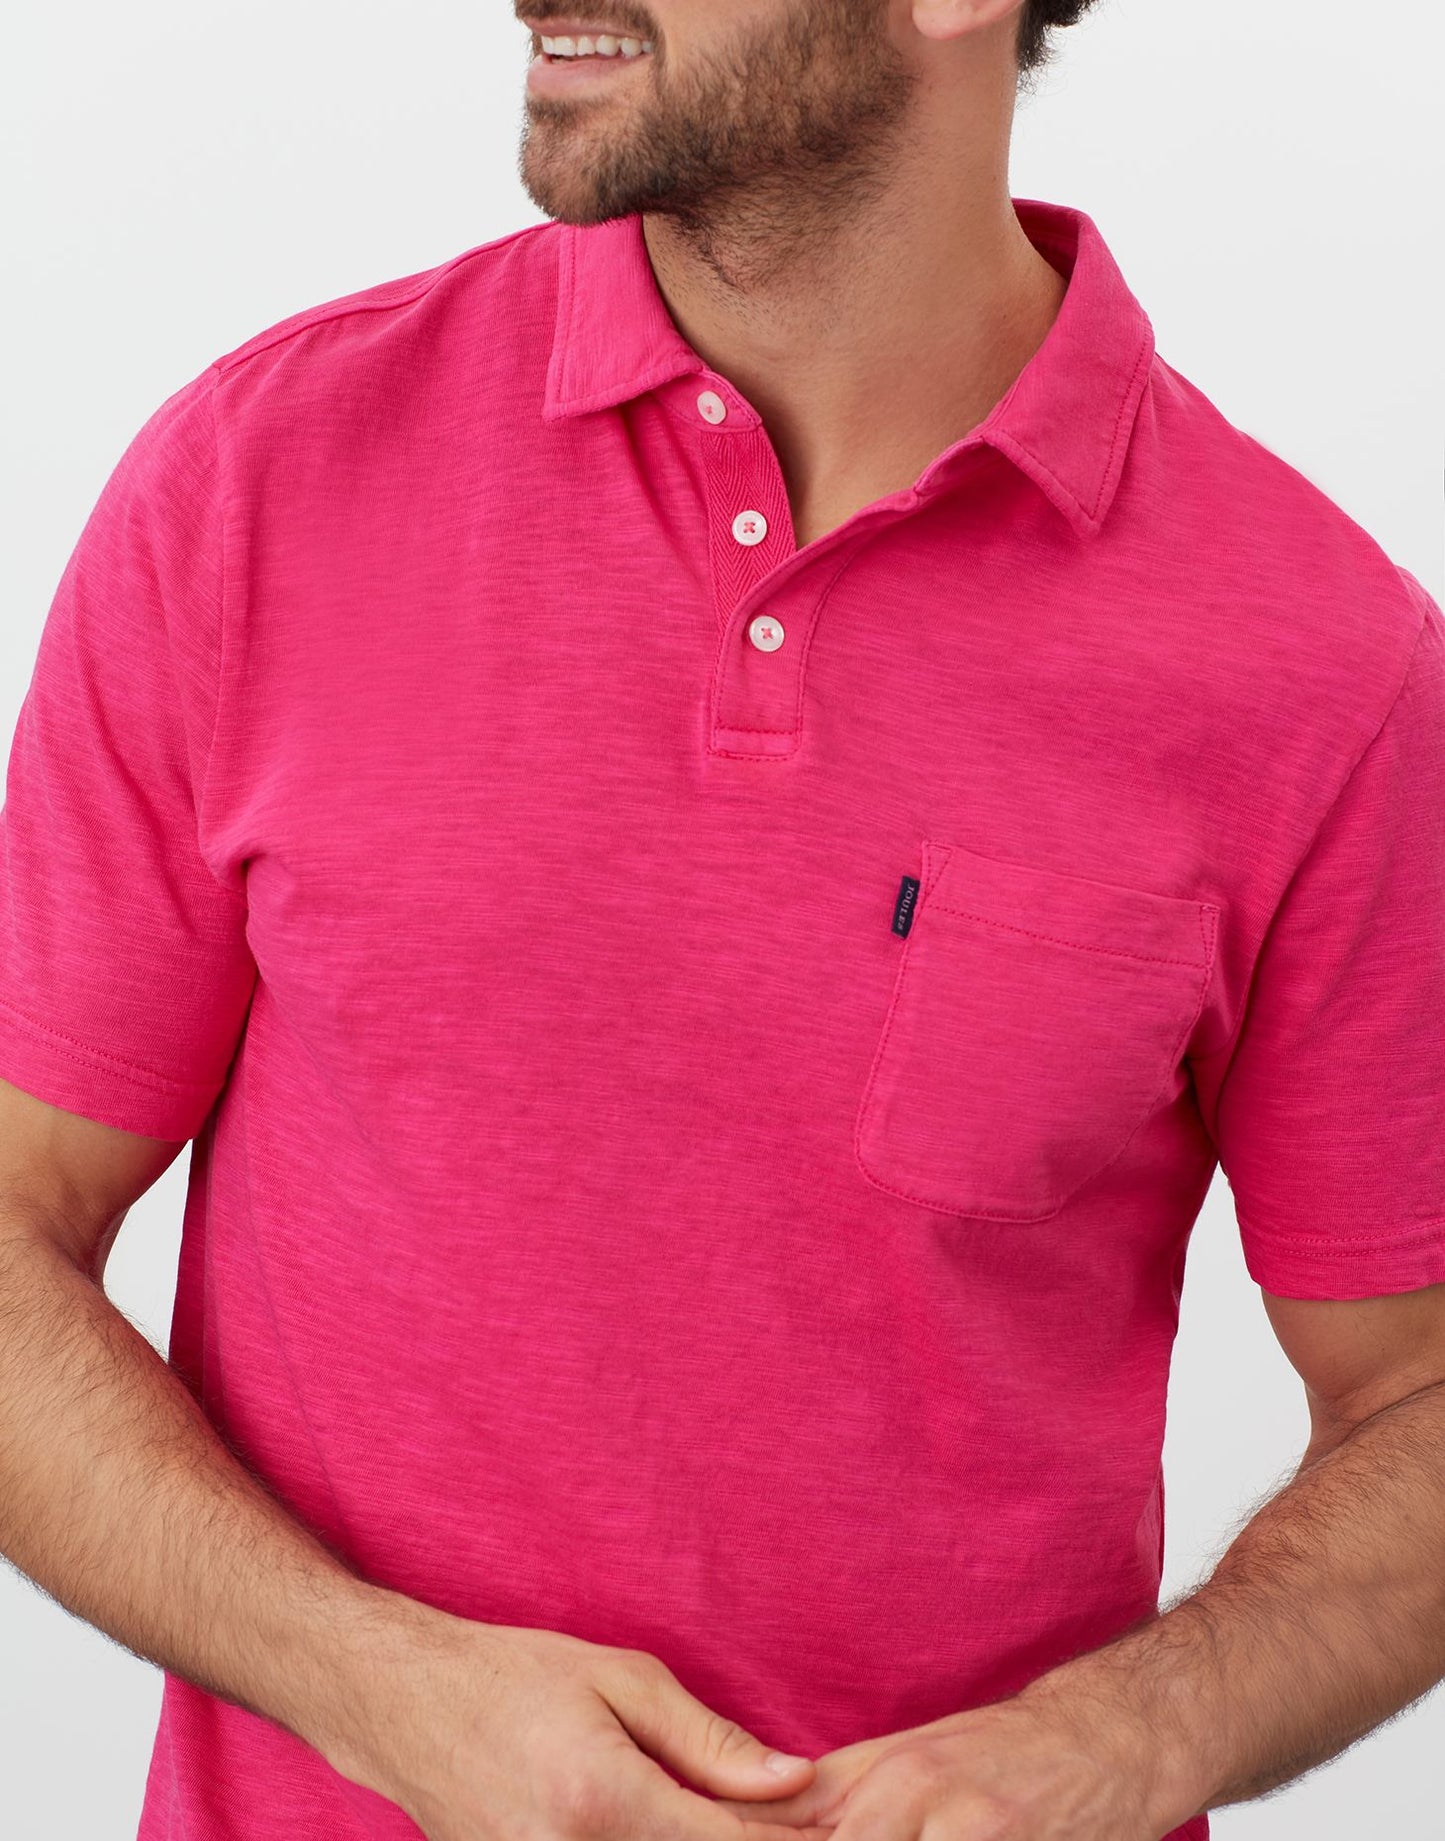 Joules Whitby Garment Dyed Polo Shirt